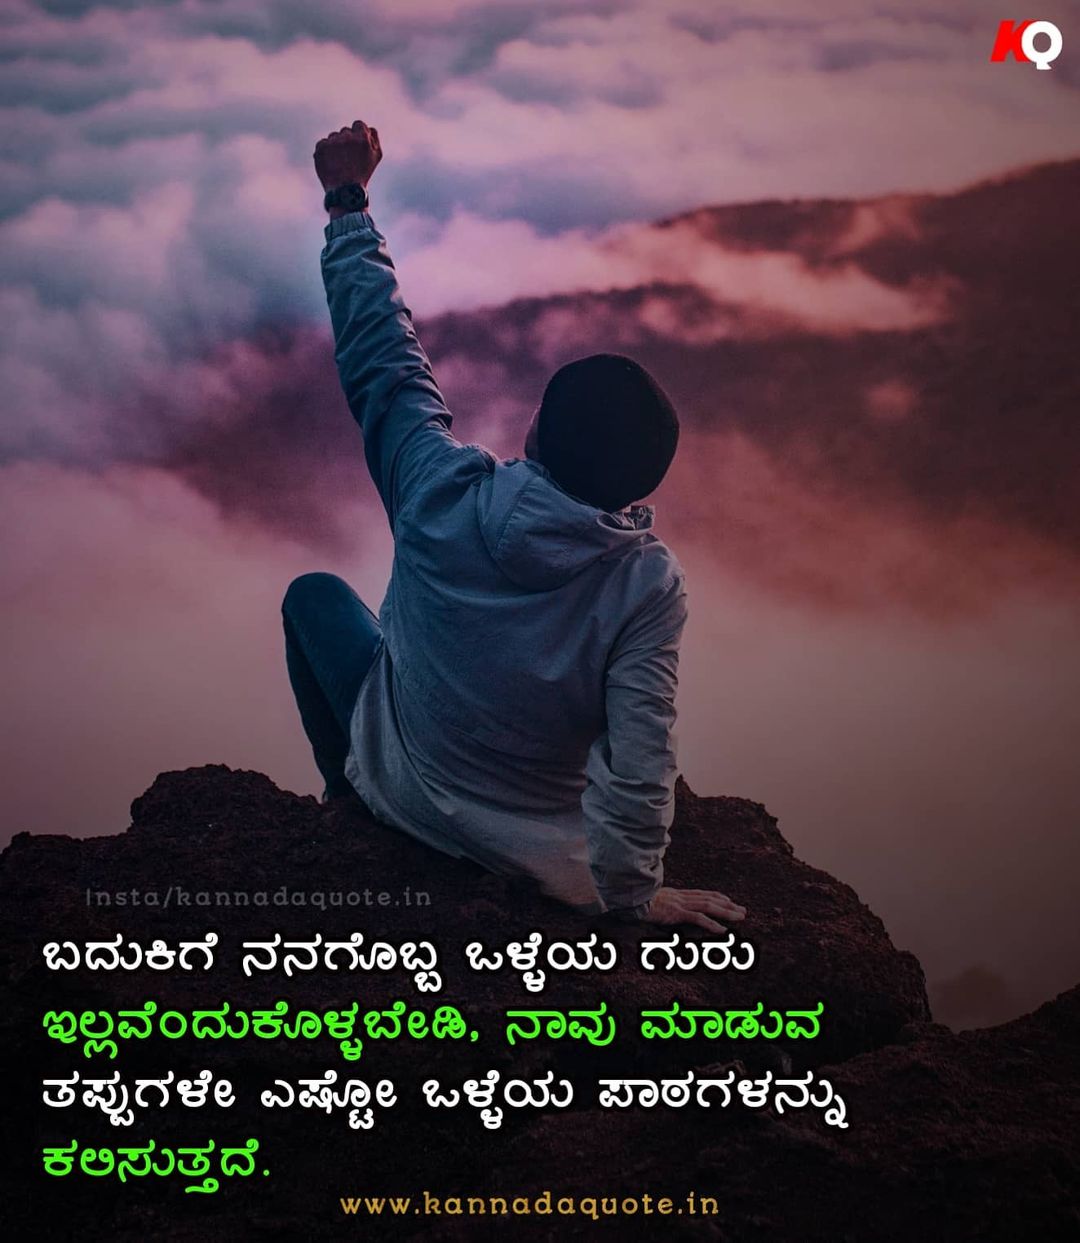 Kannada inspirational thoughts messages with images download 2021